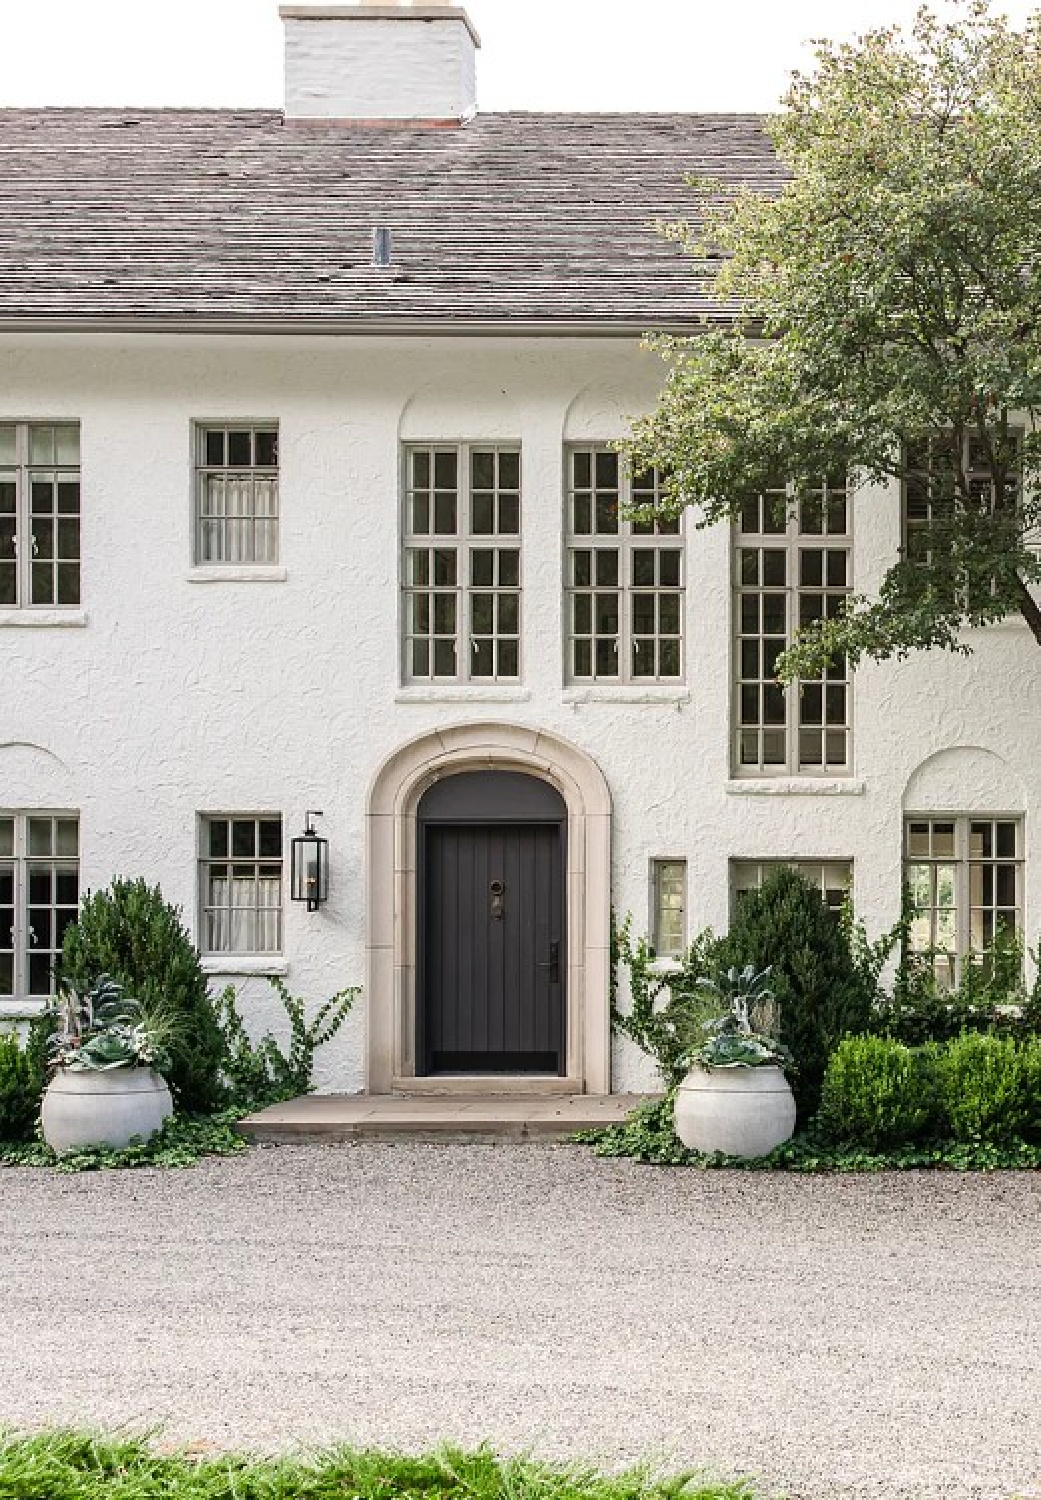 Kate Marker's 1926 Manse Hits the Market: Down to Earth Ideas from a Fantasy Home!